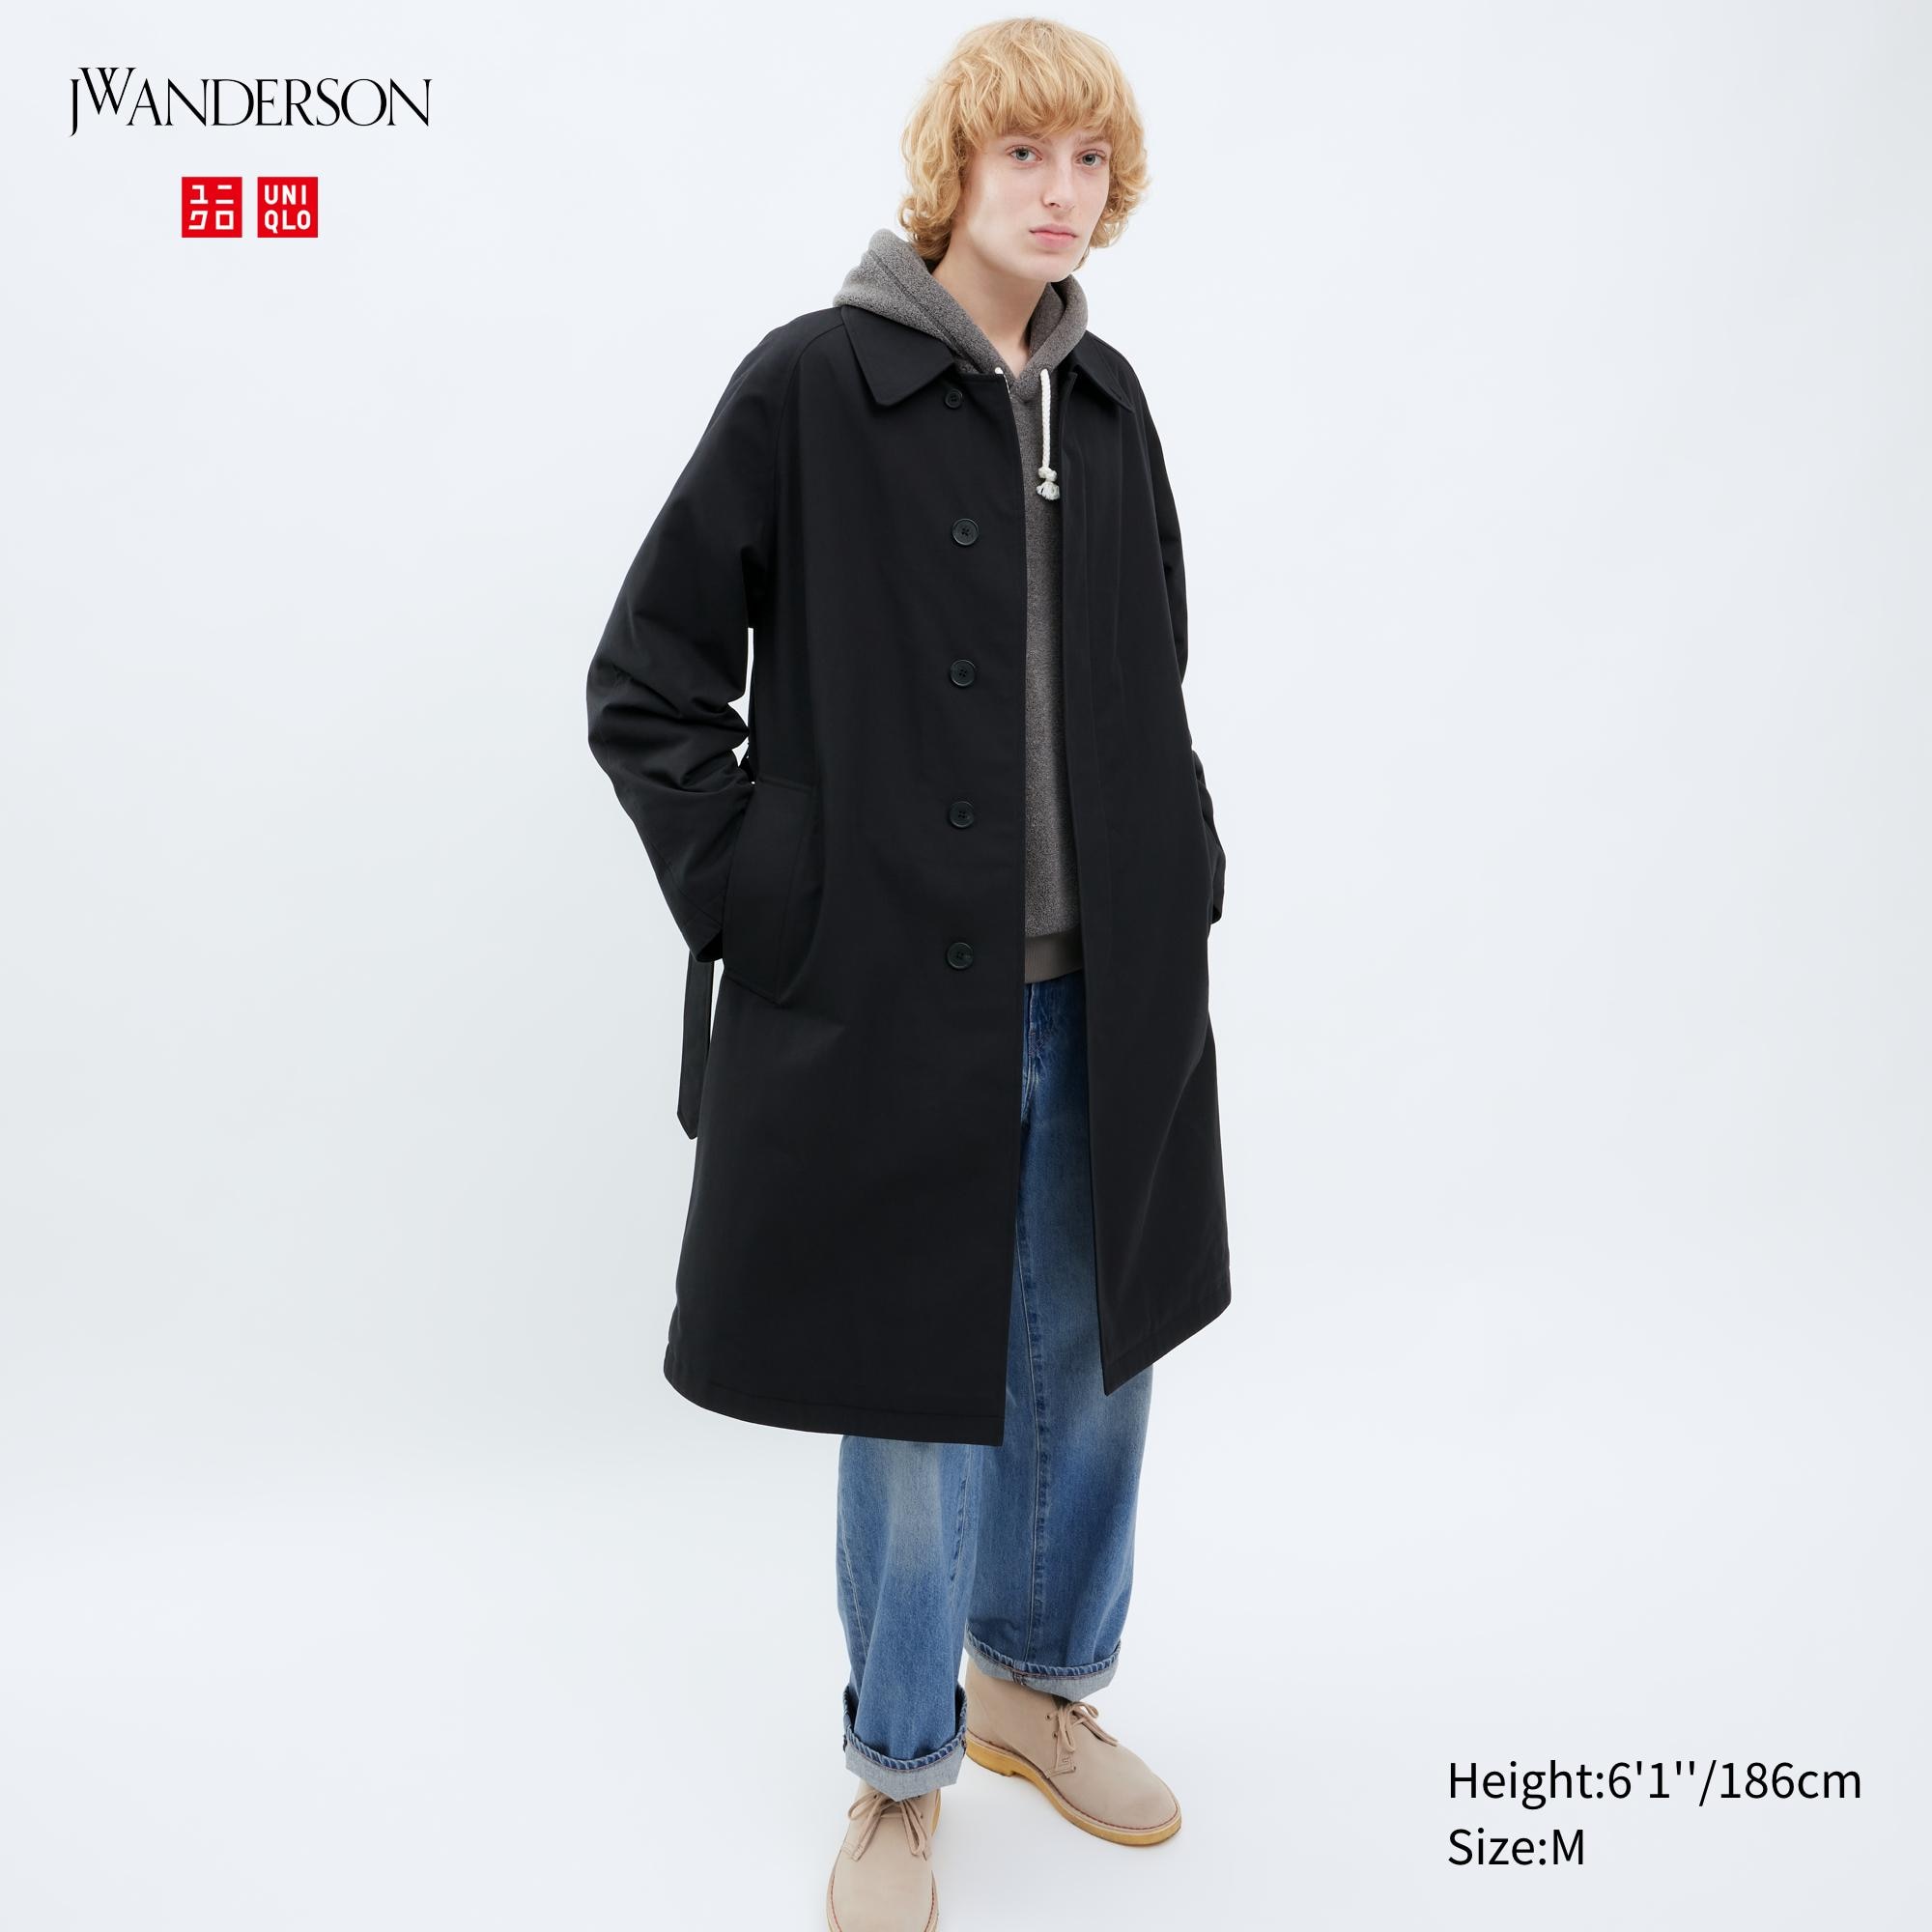 JW Anderson Trench Coat